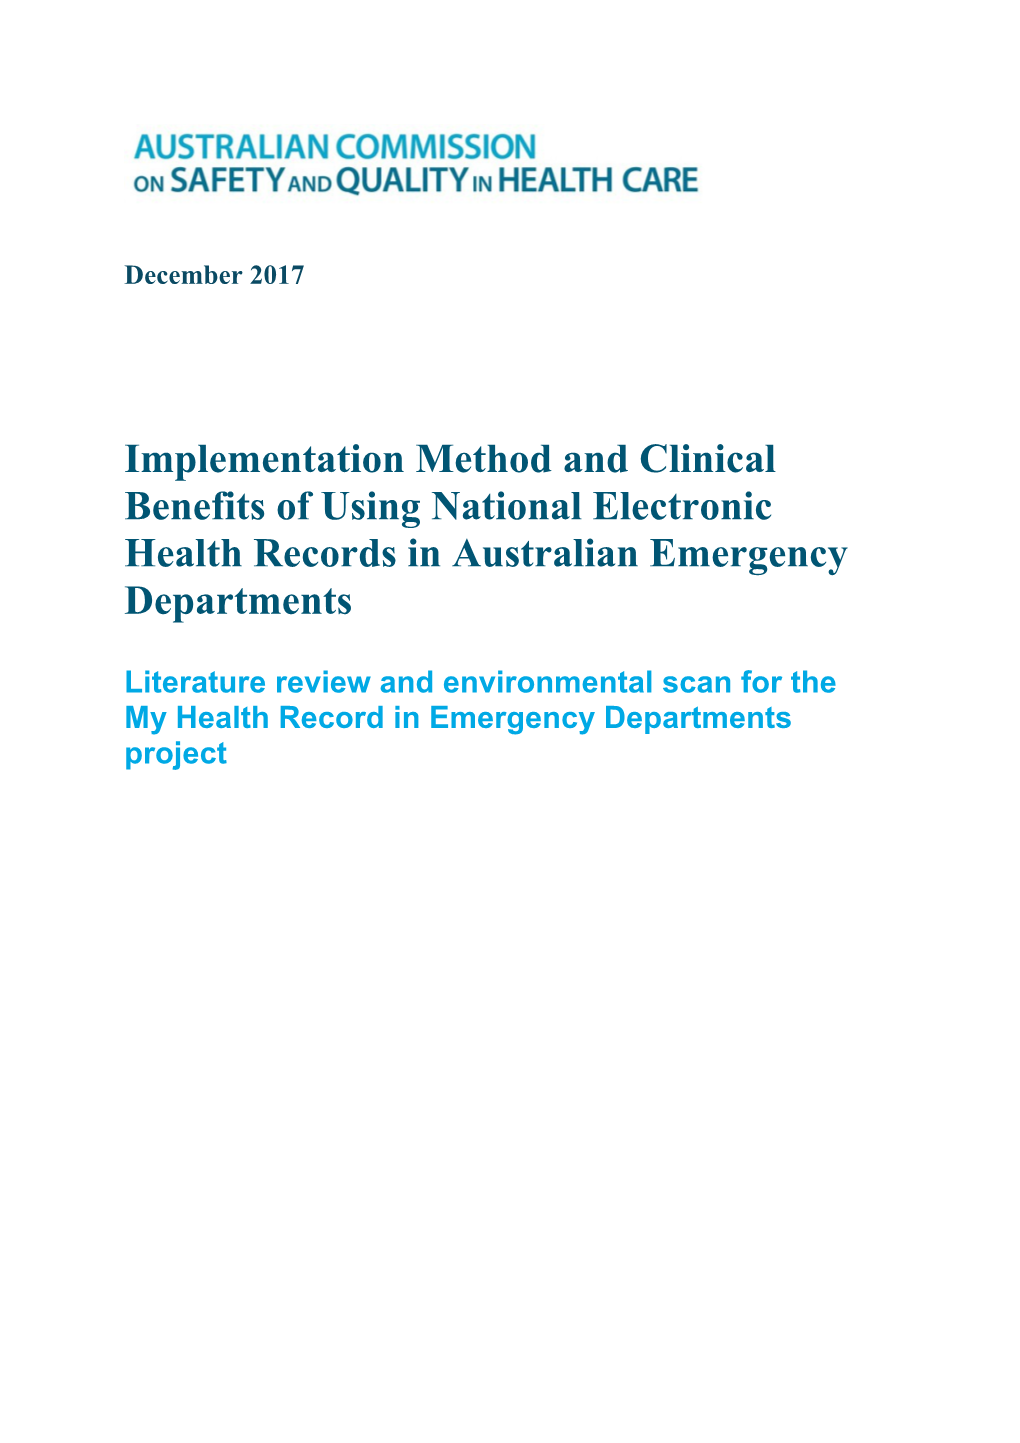 MHR in ED - Literature Review and Environmental Scan - OCT 2017